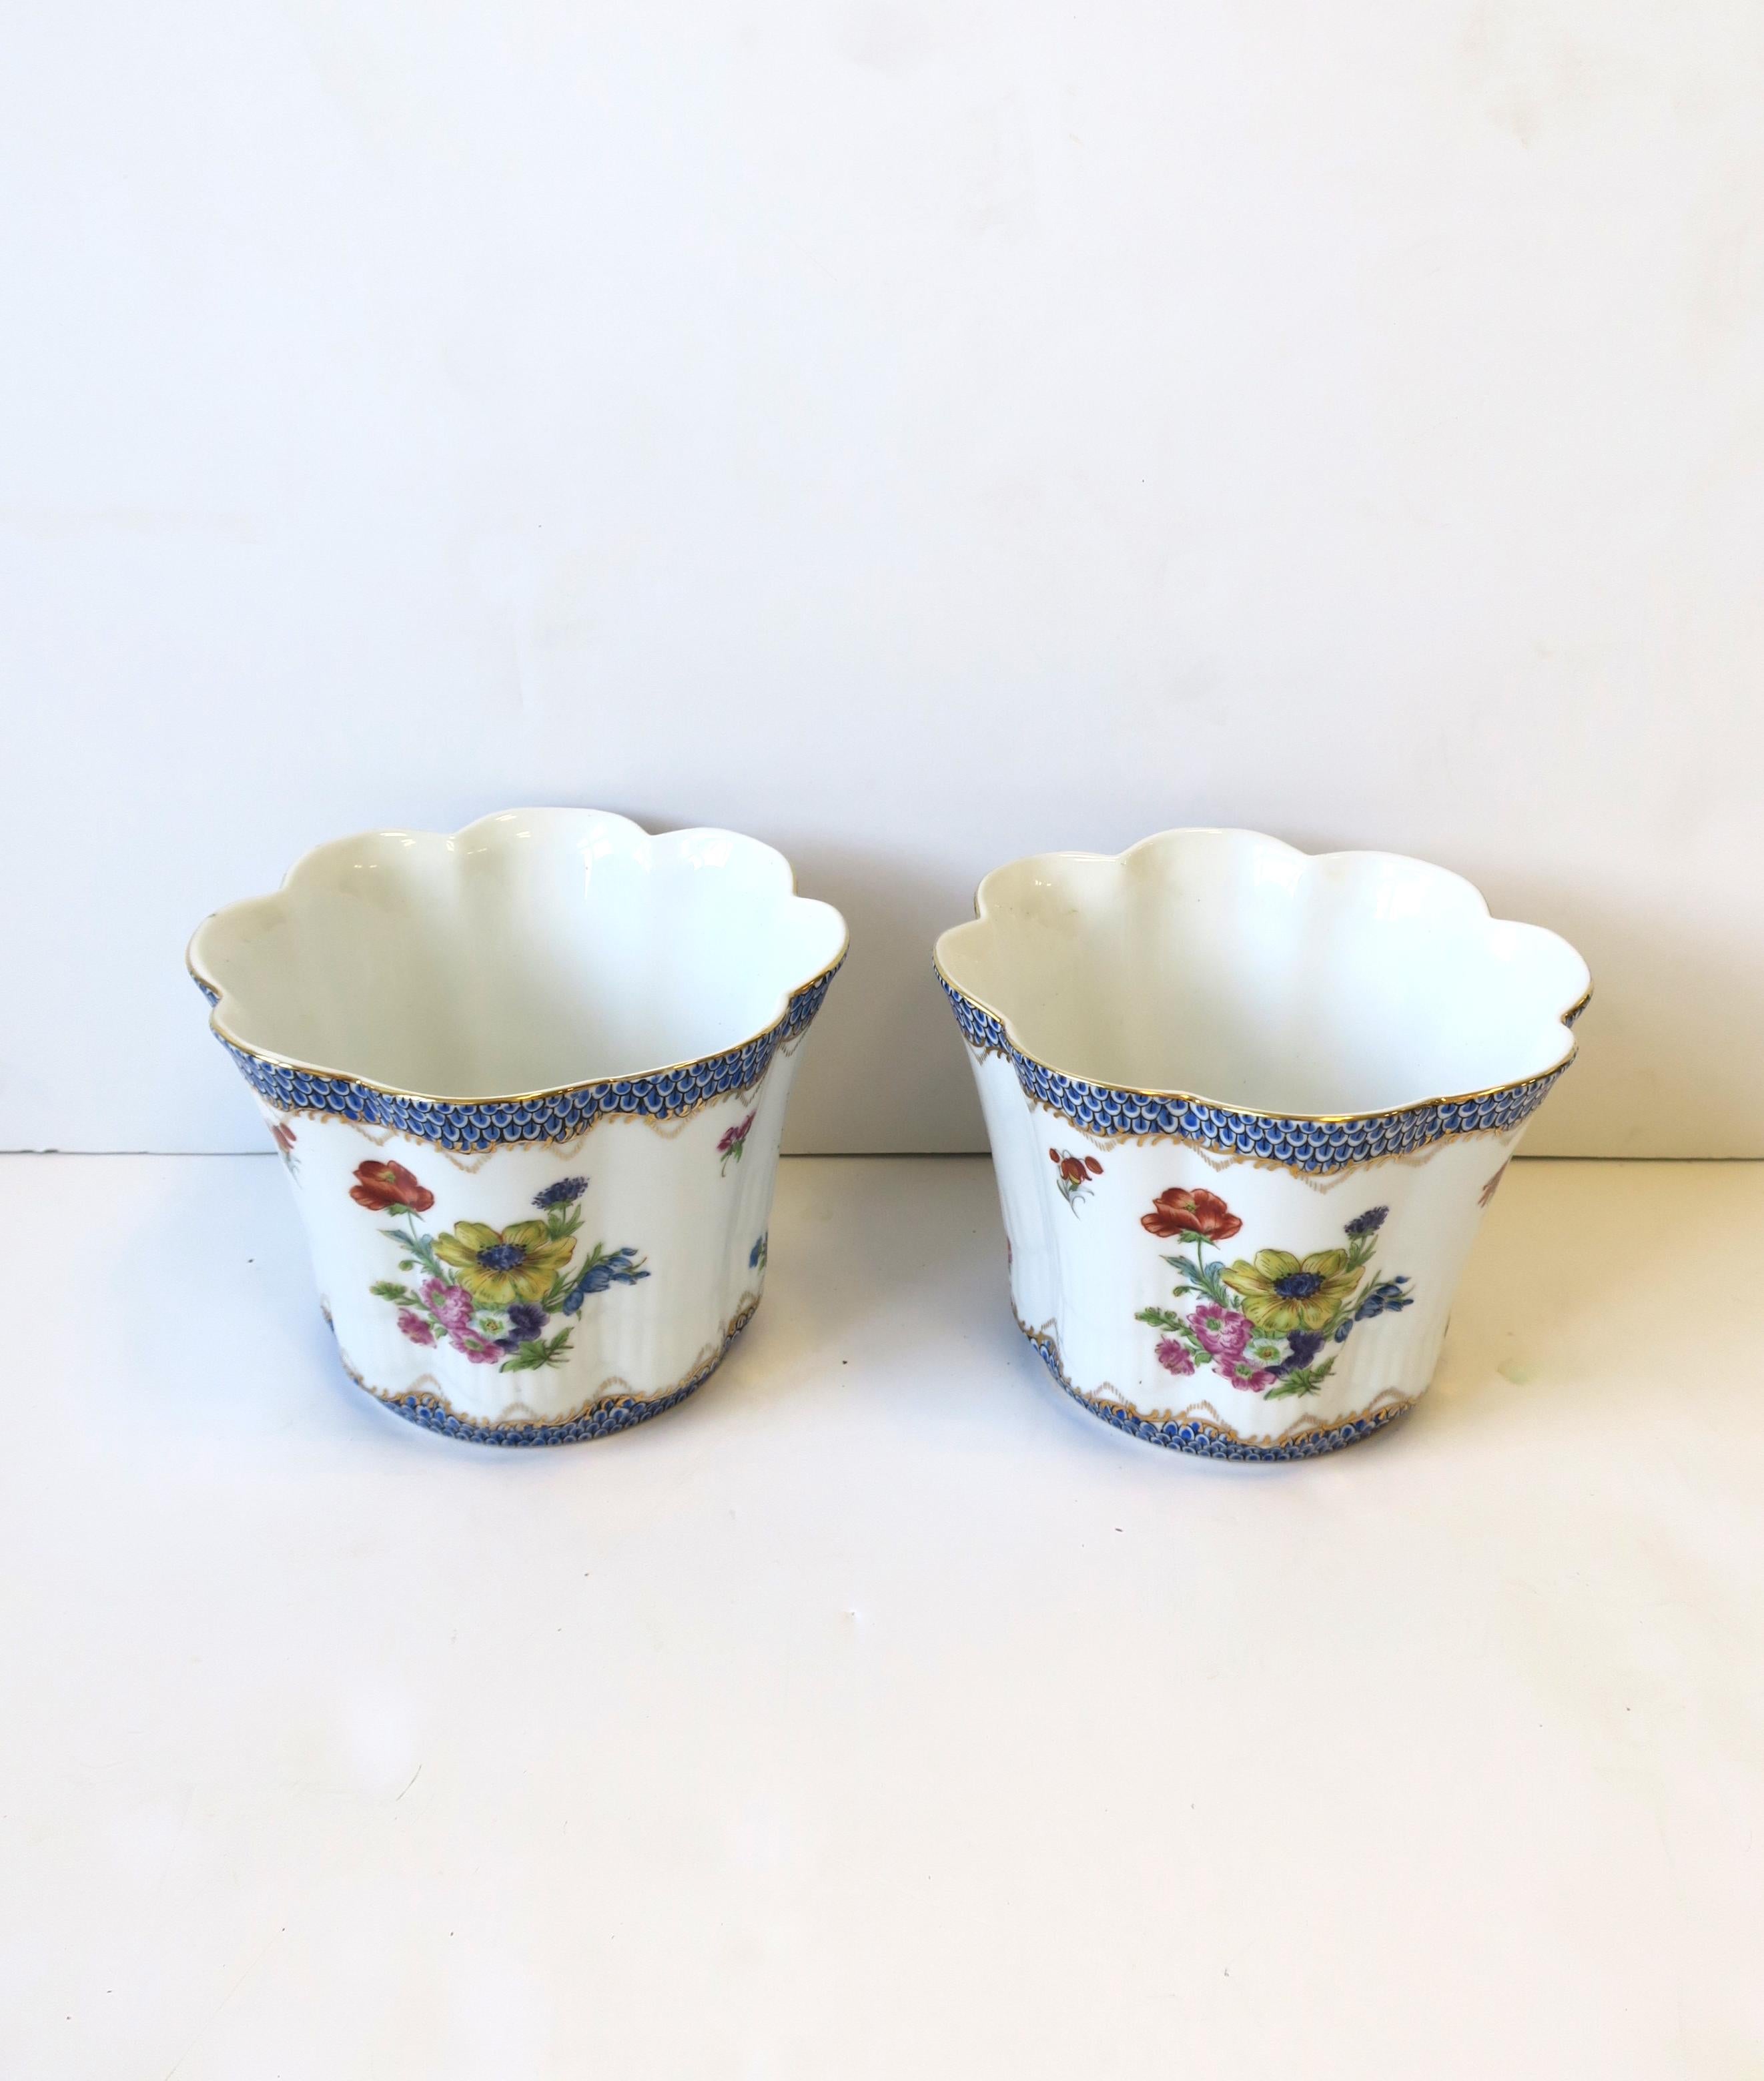 Porcelain Plant Flower Pot Holders or Planters Cachepots Jardinieres, Pair In Good Condition For Sale In New York, NY